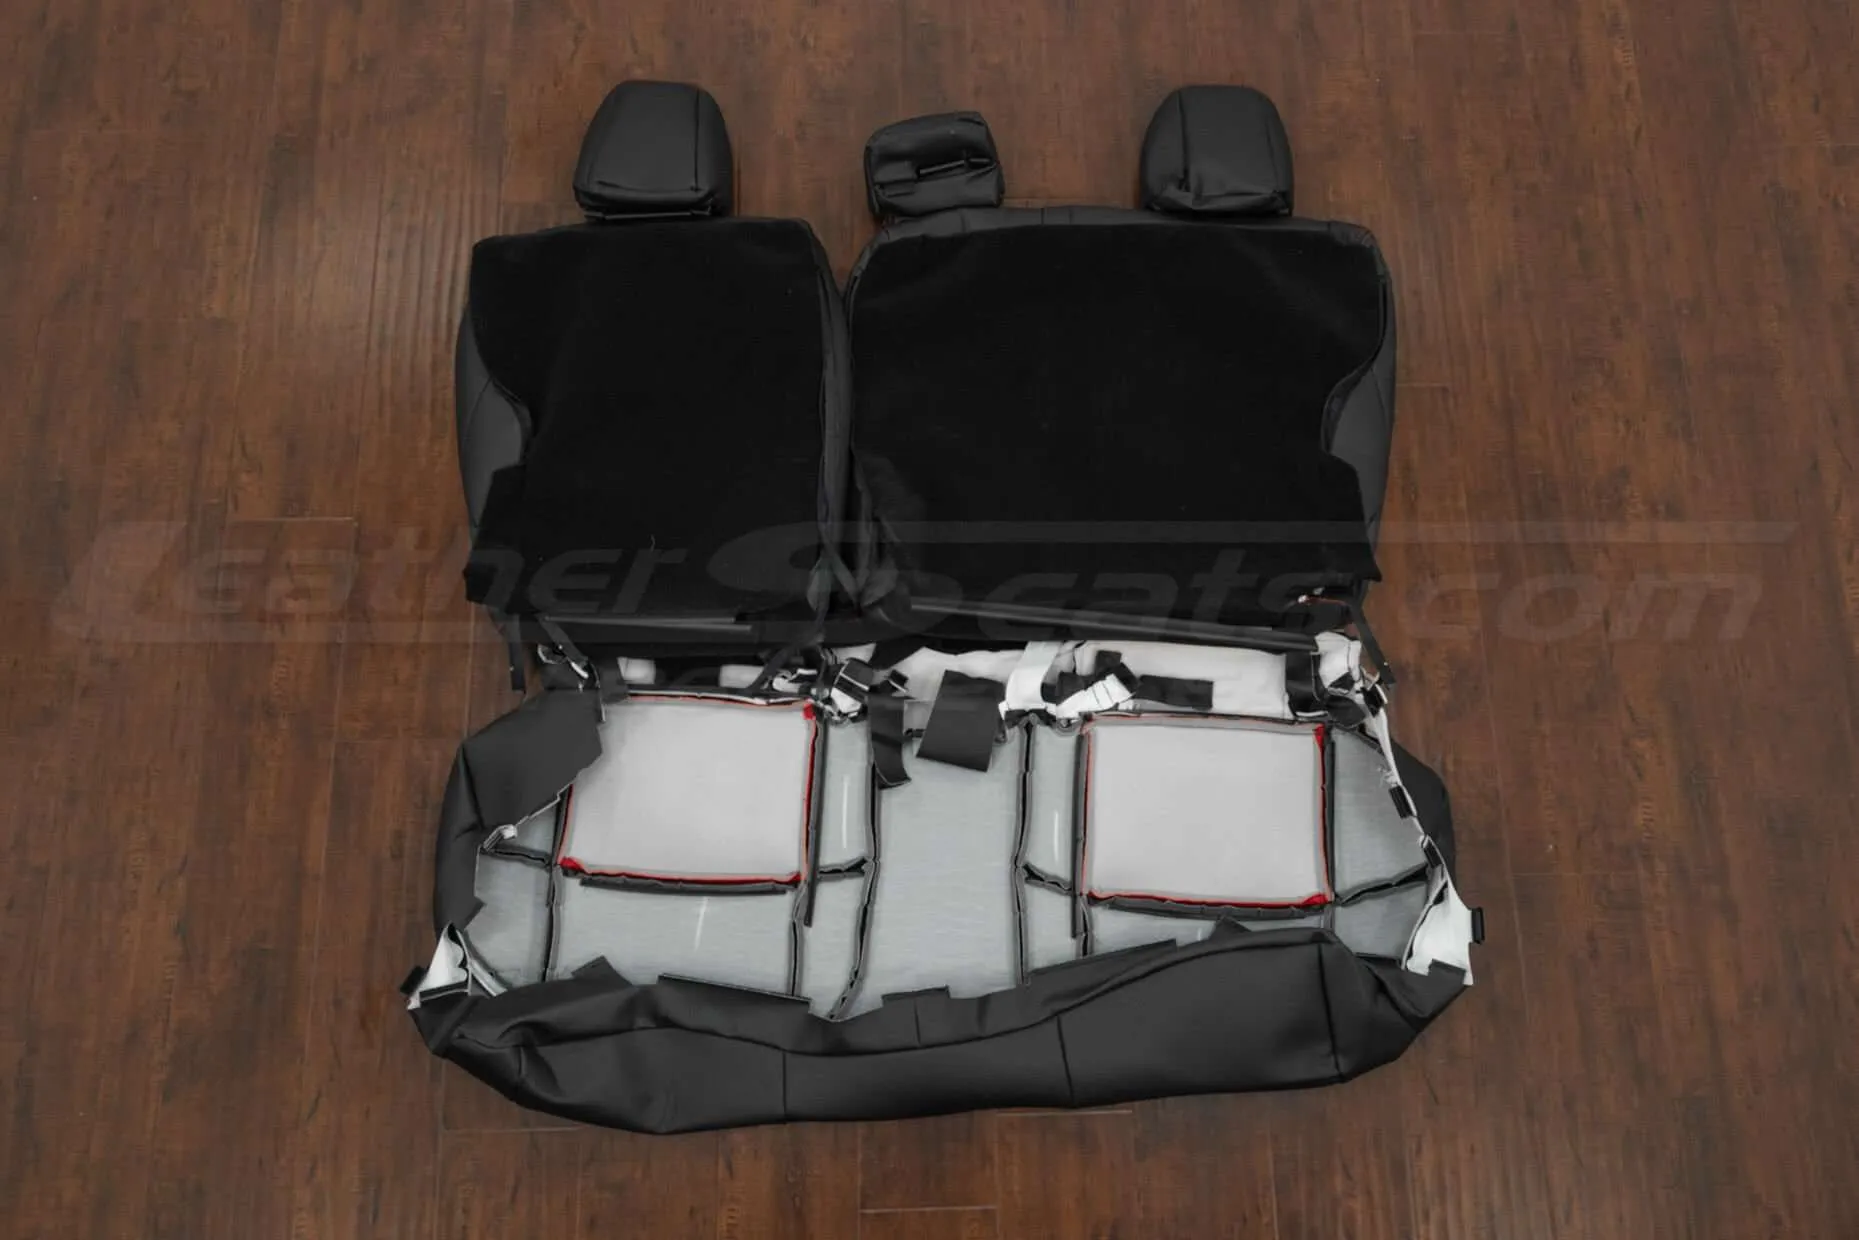 Rear seat upholstery - flipped